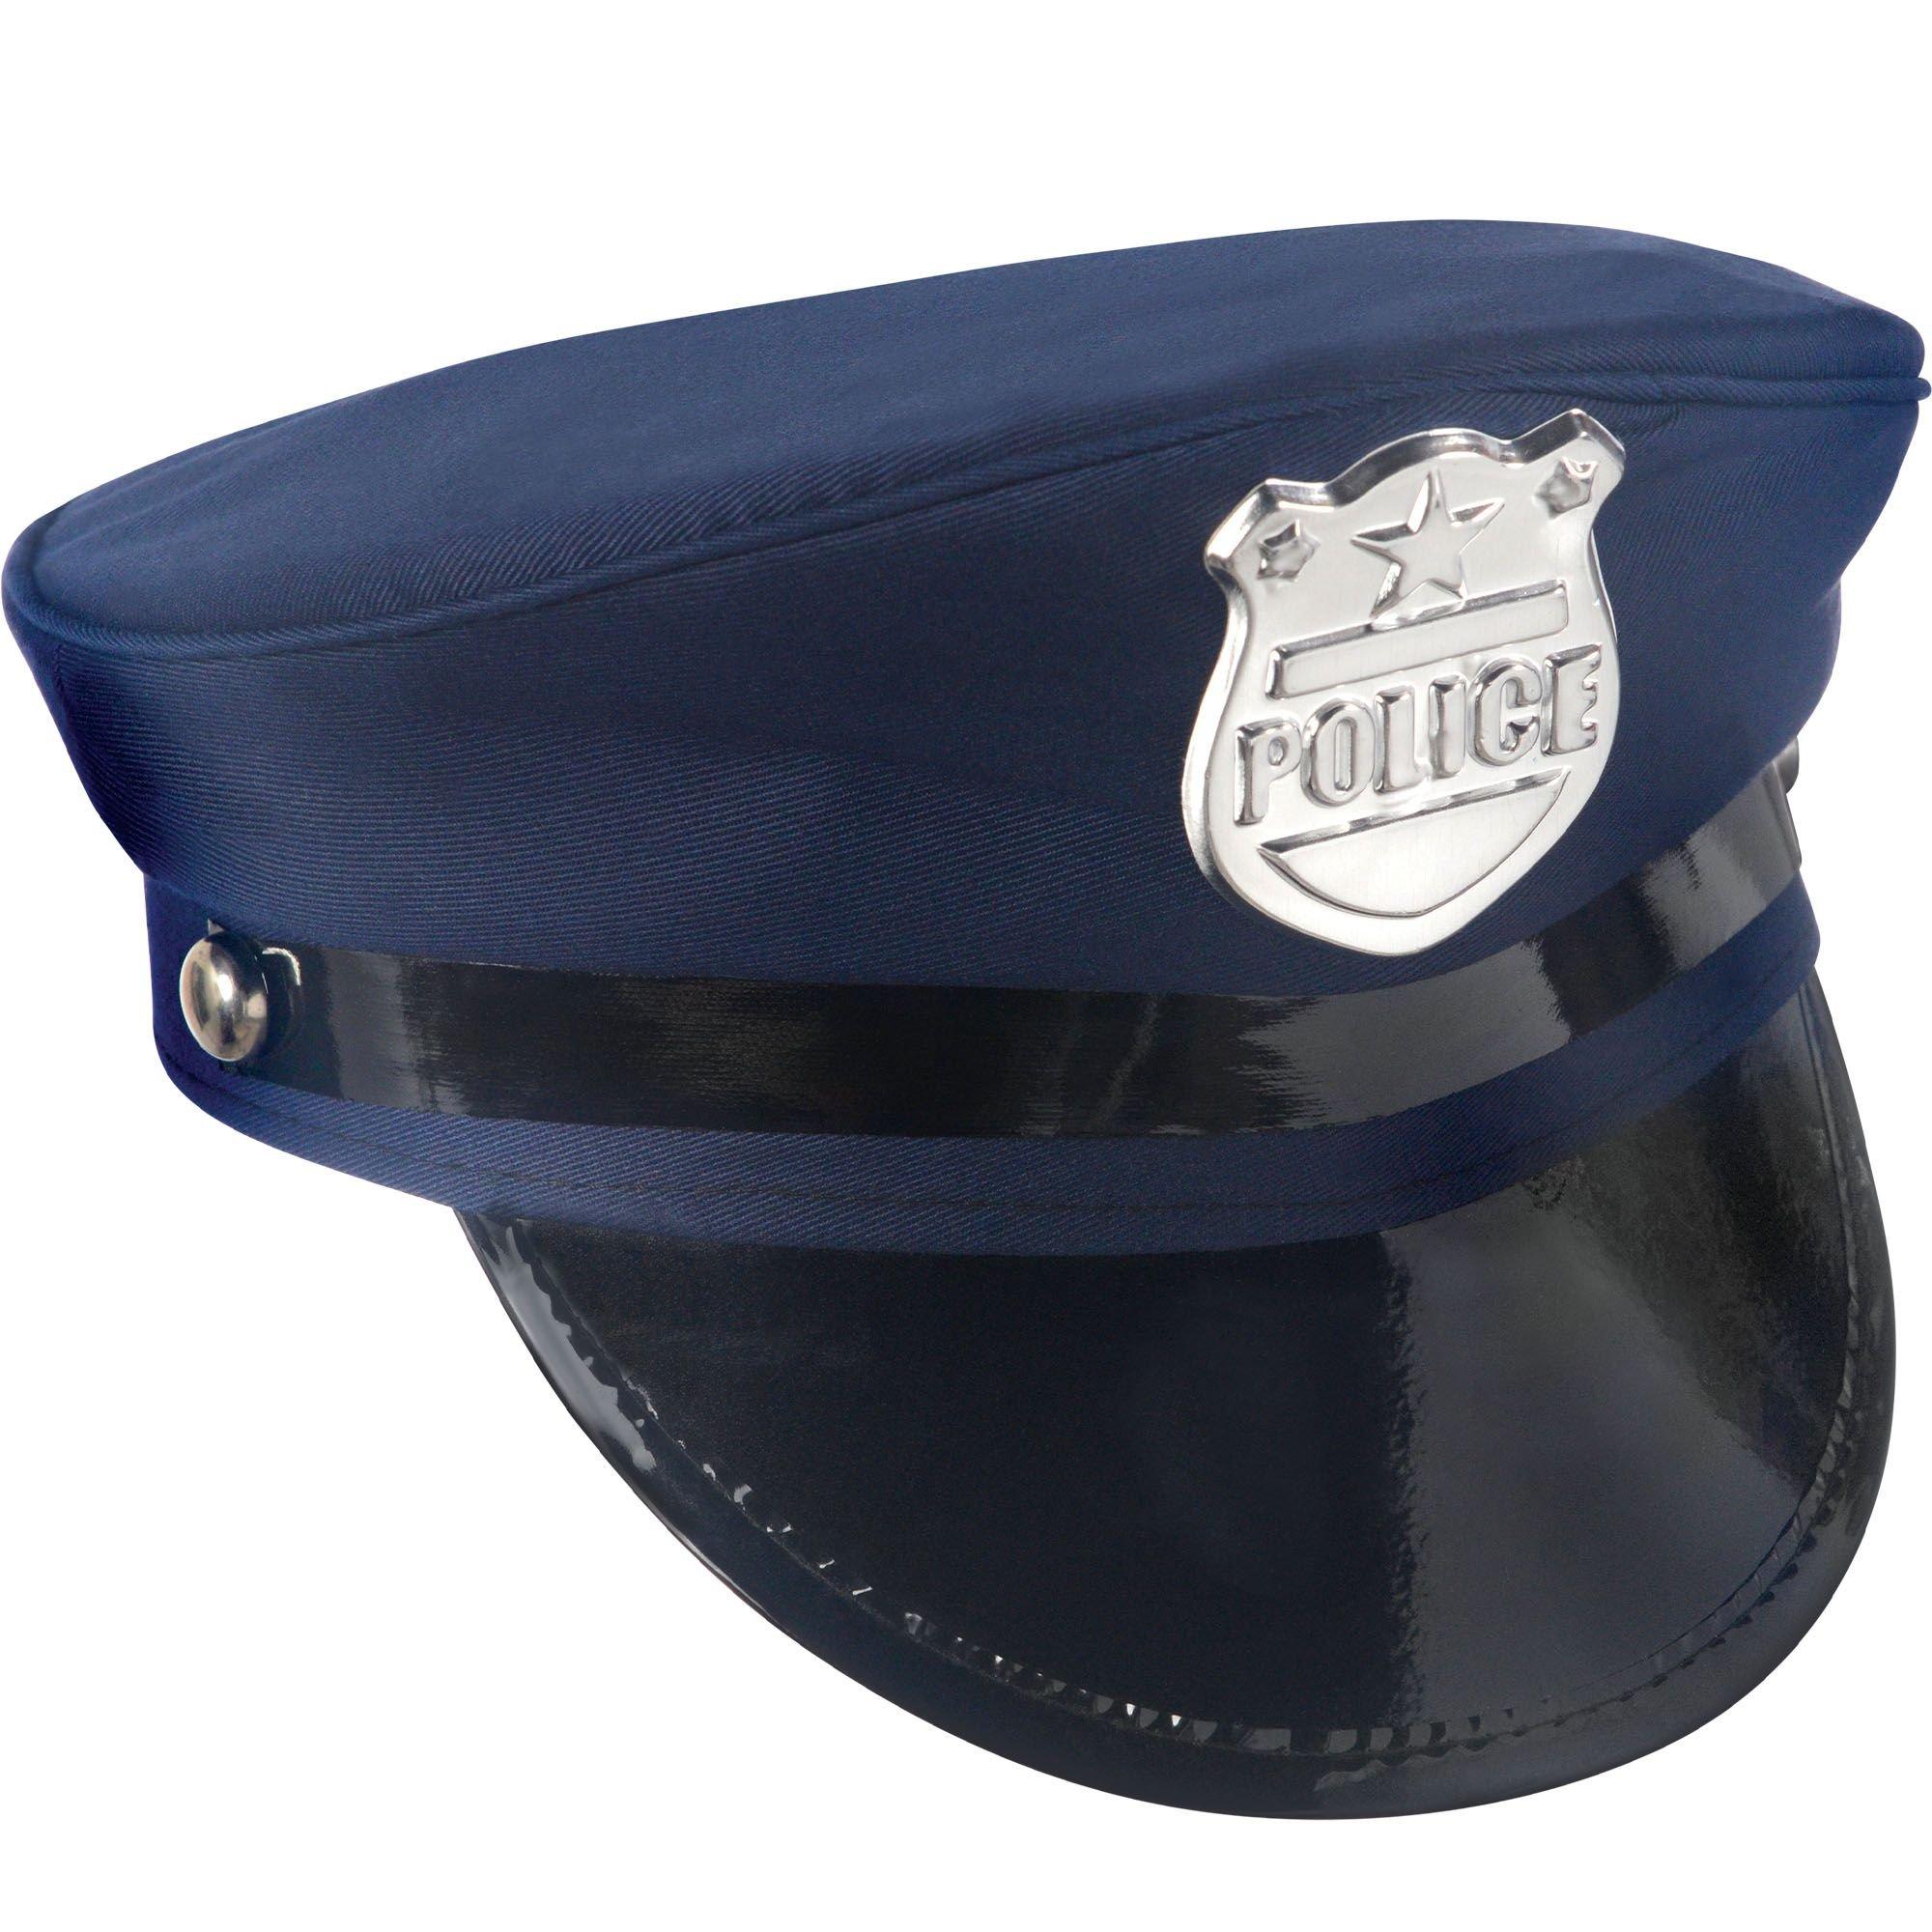 Authentic Personalized Kid's Police Costume Set - Like the real thing!